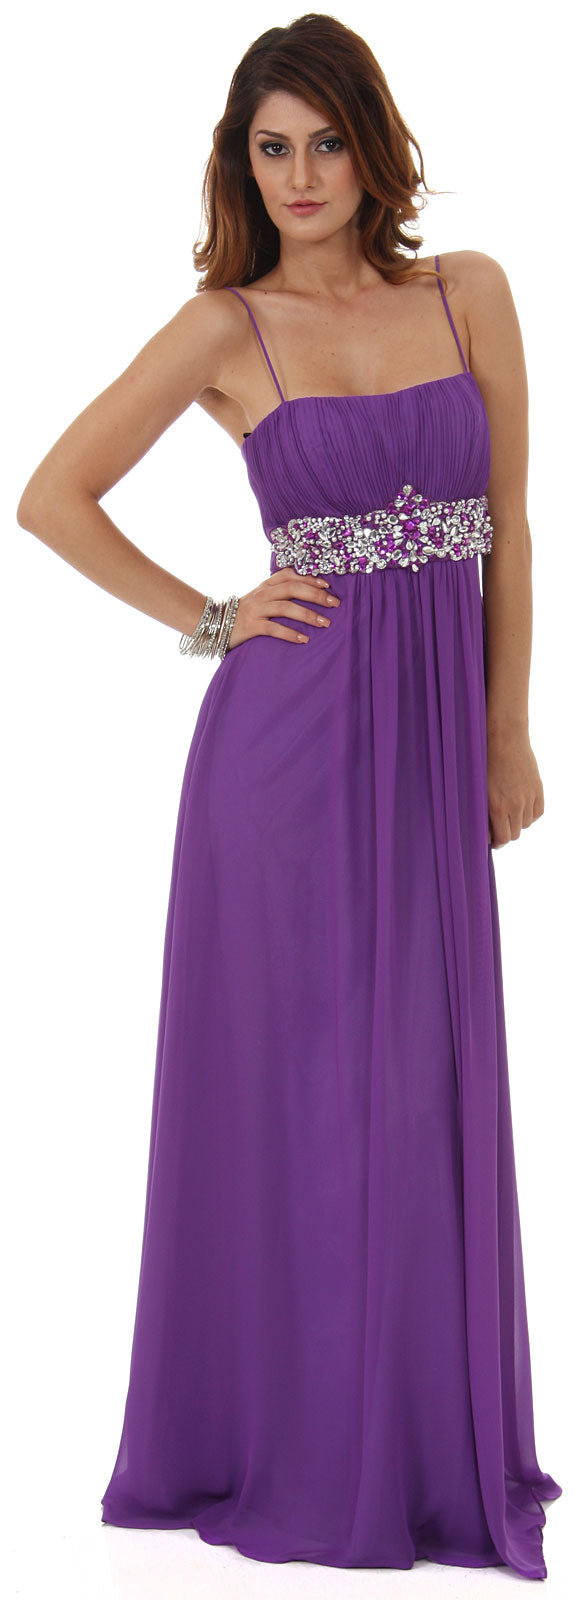 Image of Empire Cut Long Formal Dress With Bejeweled Waist in Violet